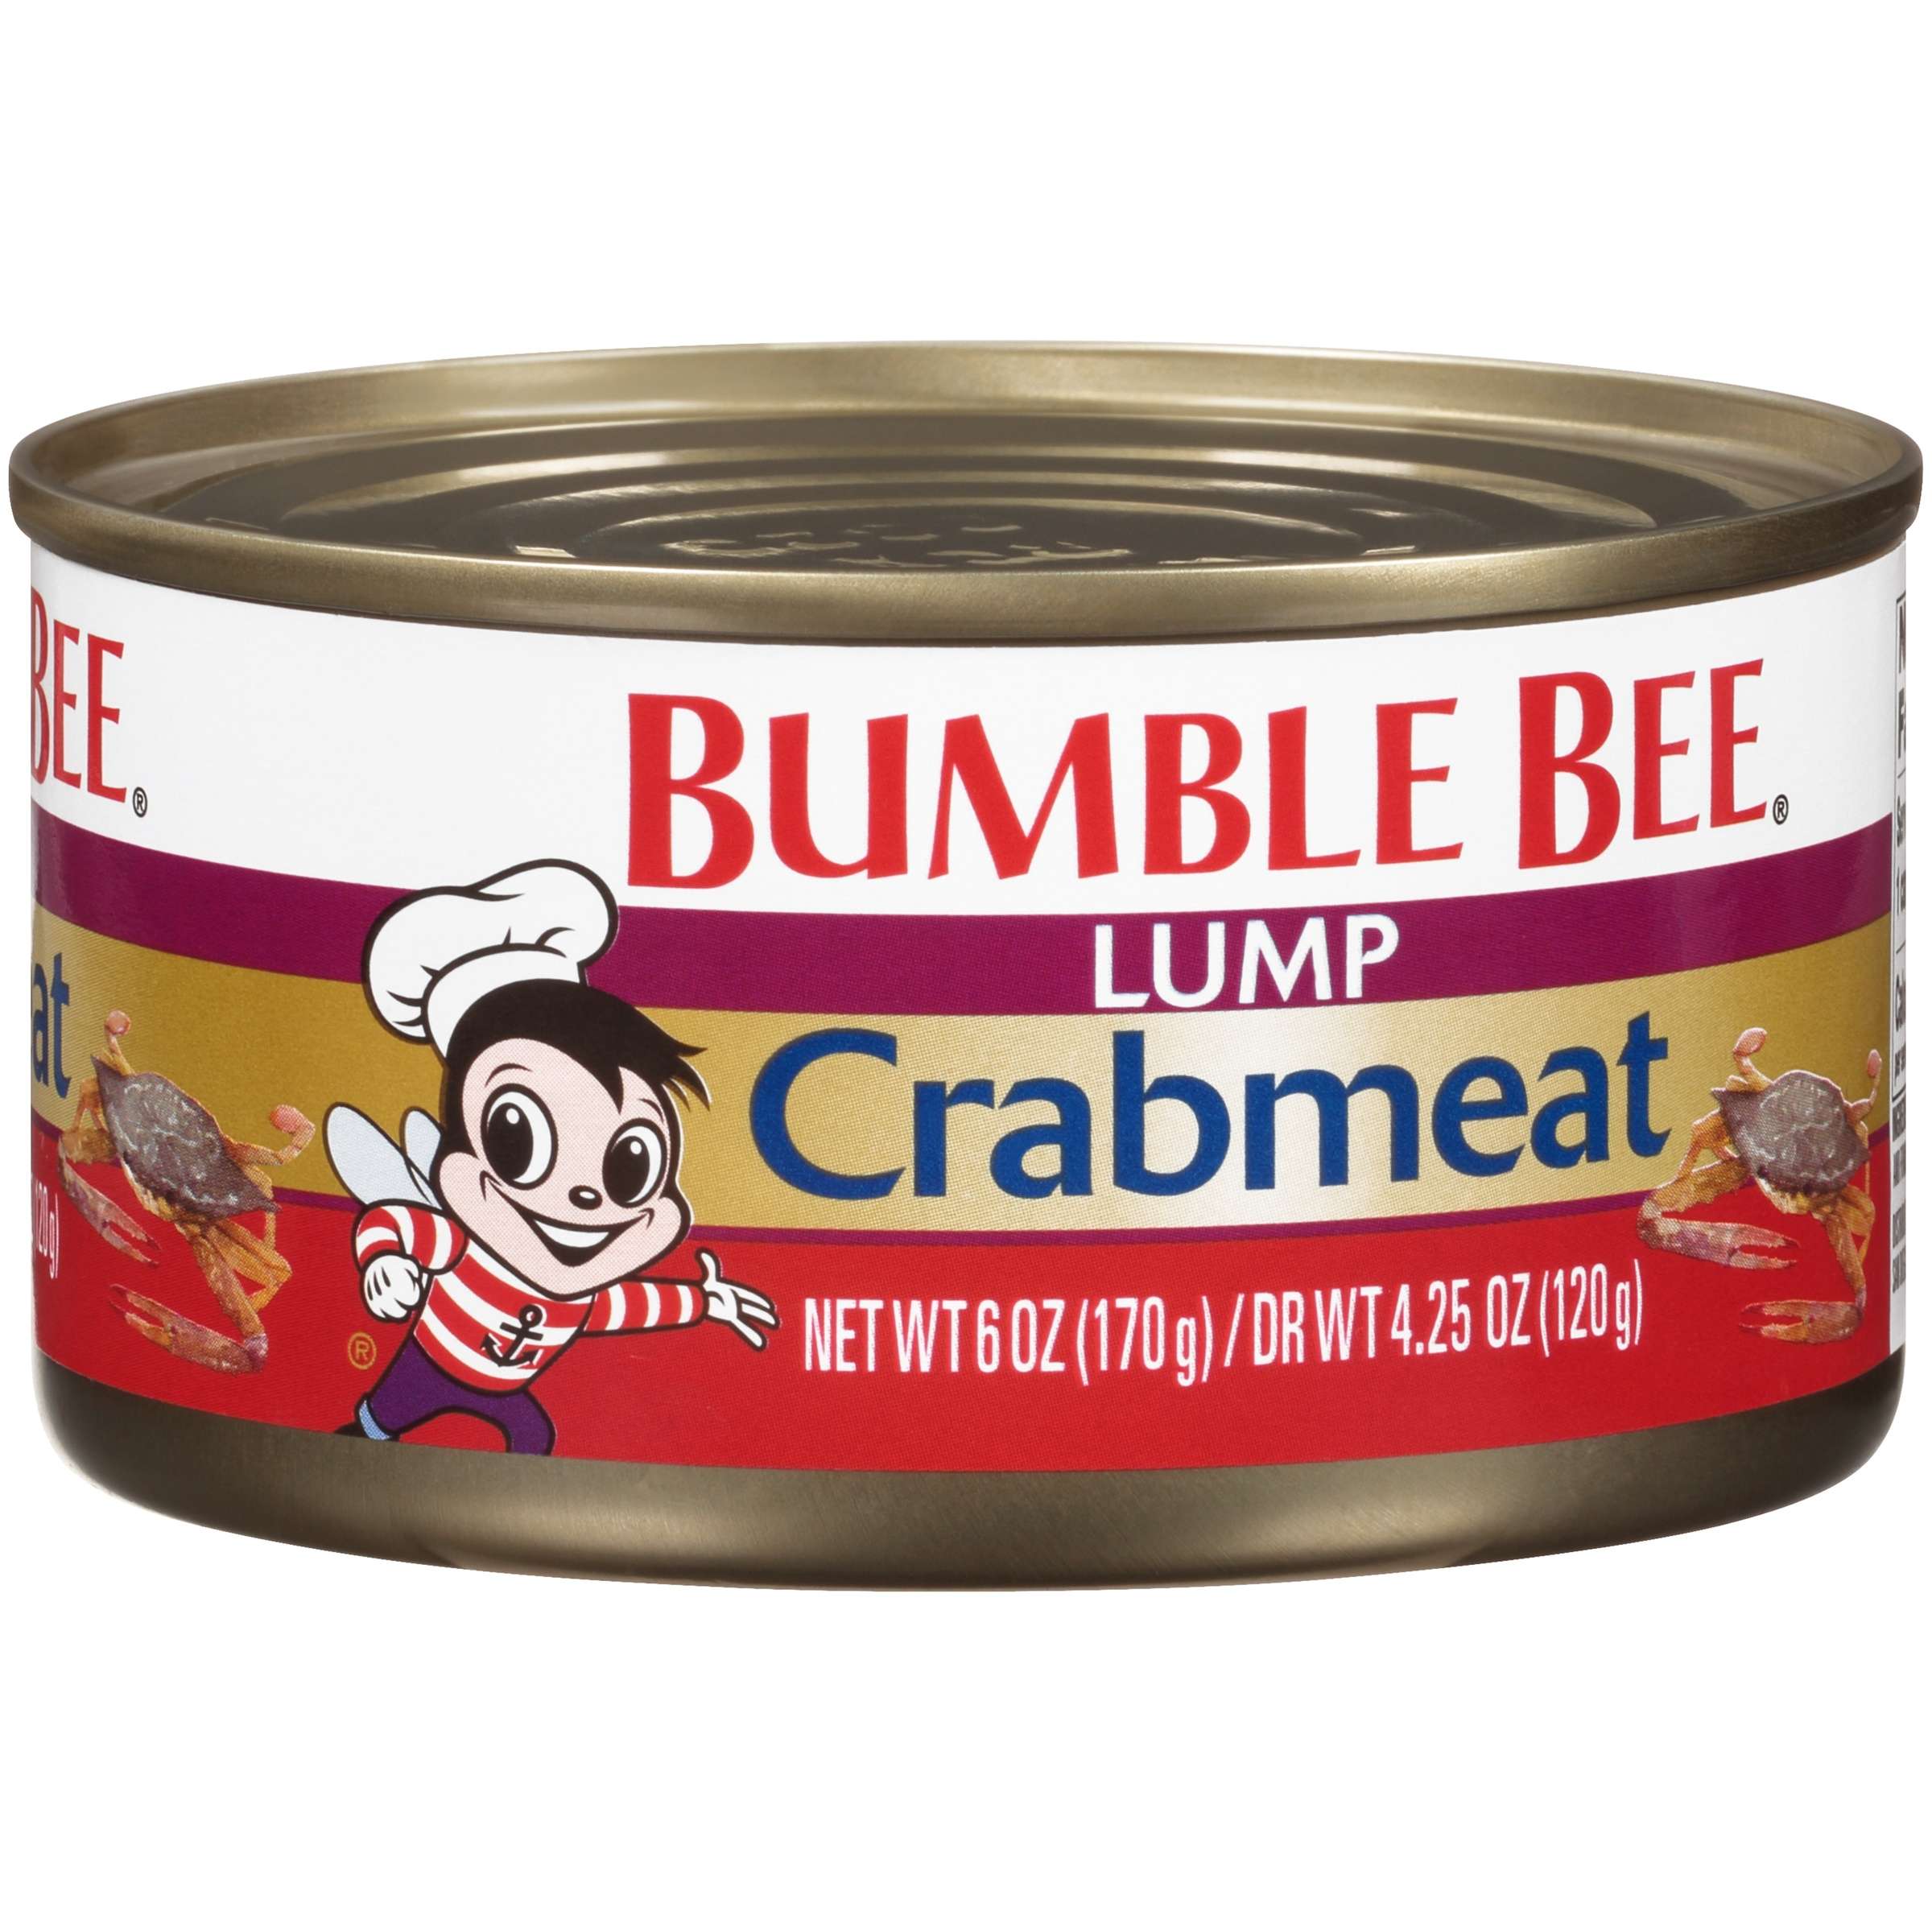 Bumble Bee Crab Meat Recipes